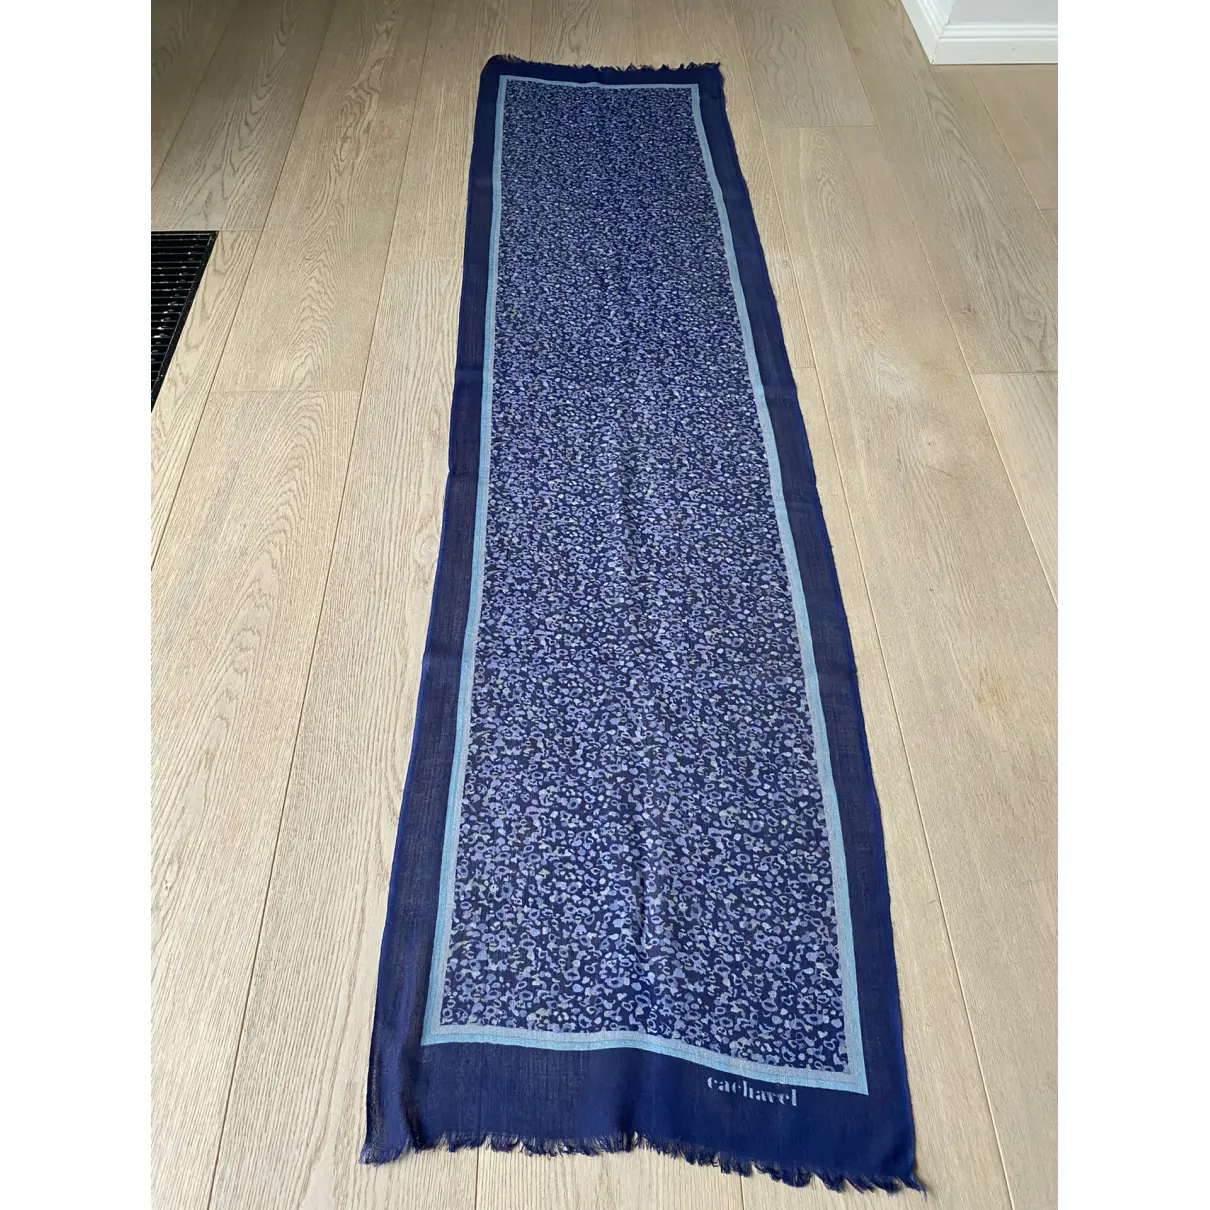 Buy Cacharel Wool stole online